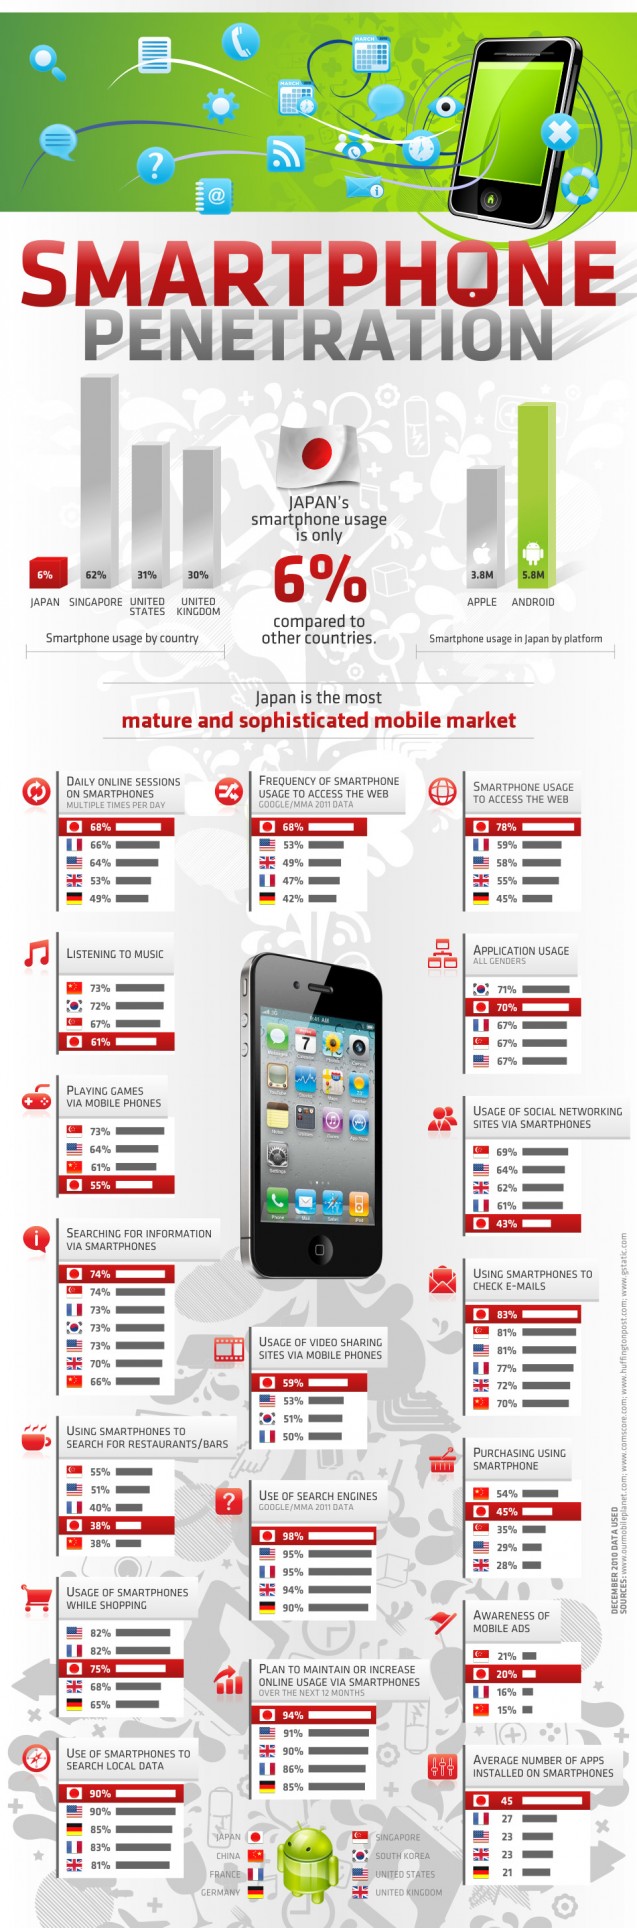 Smartphone Penetration: Japan Users Lead Way When Adapting To Mobile Technologies [INFOGRAPHIC]